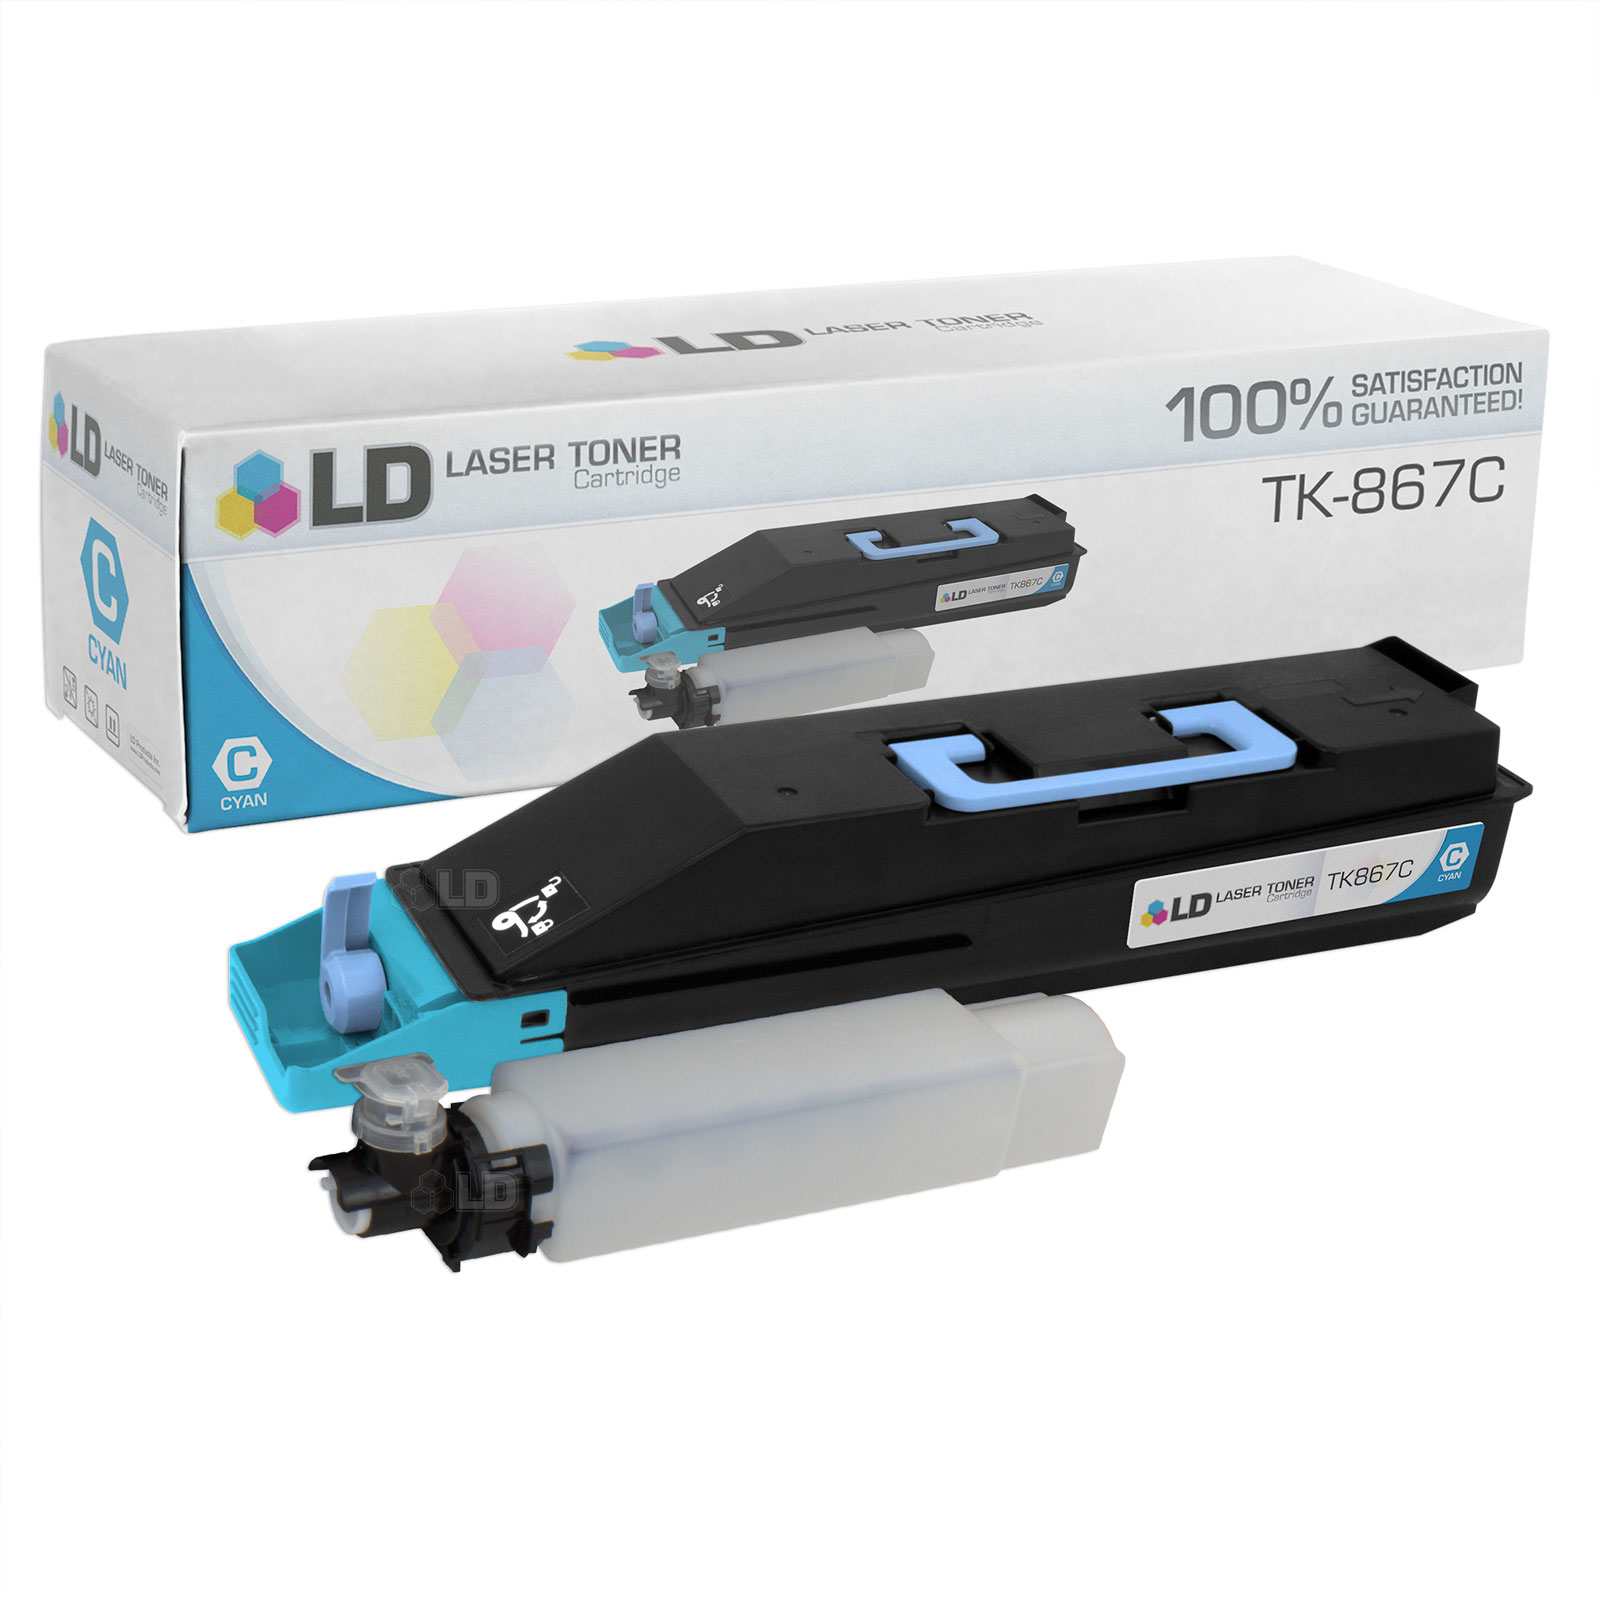 LD Compatible Replacement for Kyocera Mita TK-867C Cyan Laser Toner Cartridge for use in Kyocera Mita TASKalfa 250ci, and 300ci s - image 1 of 1